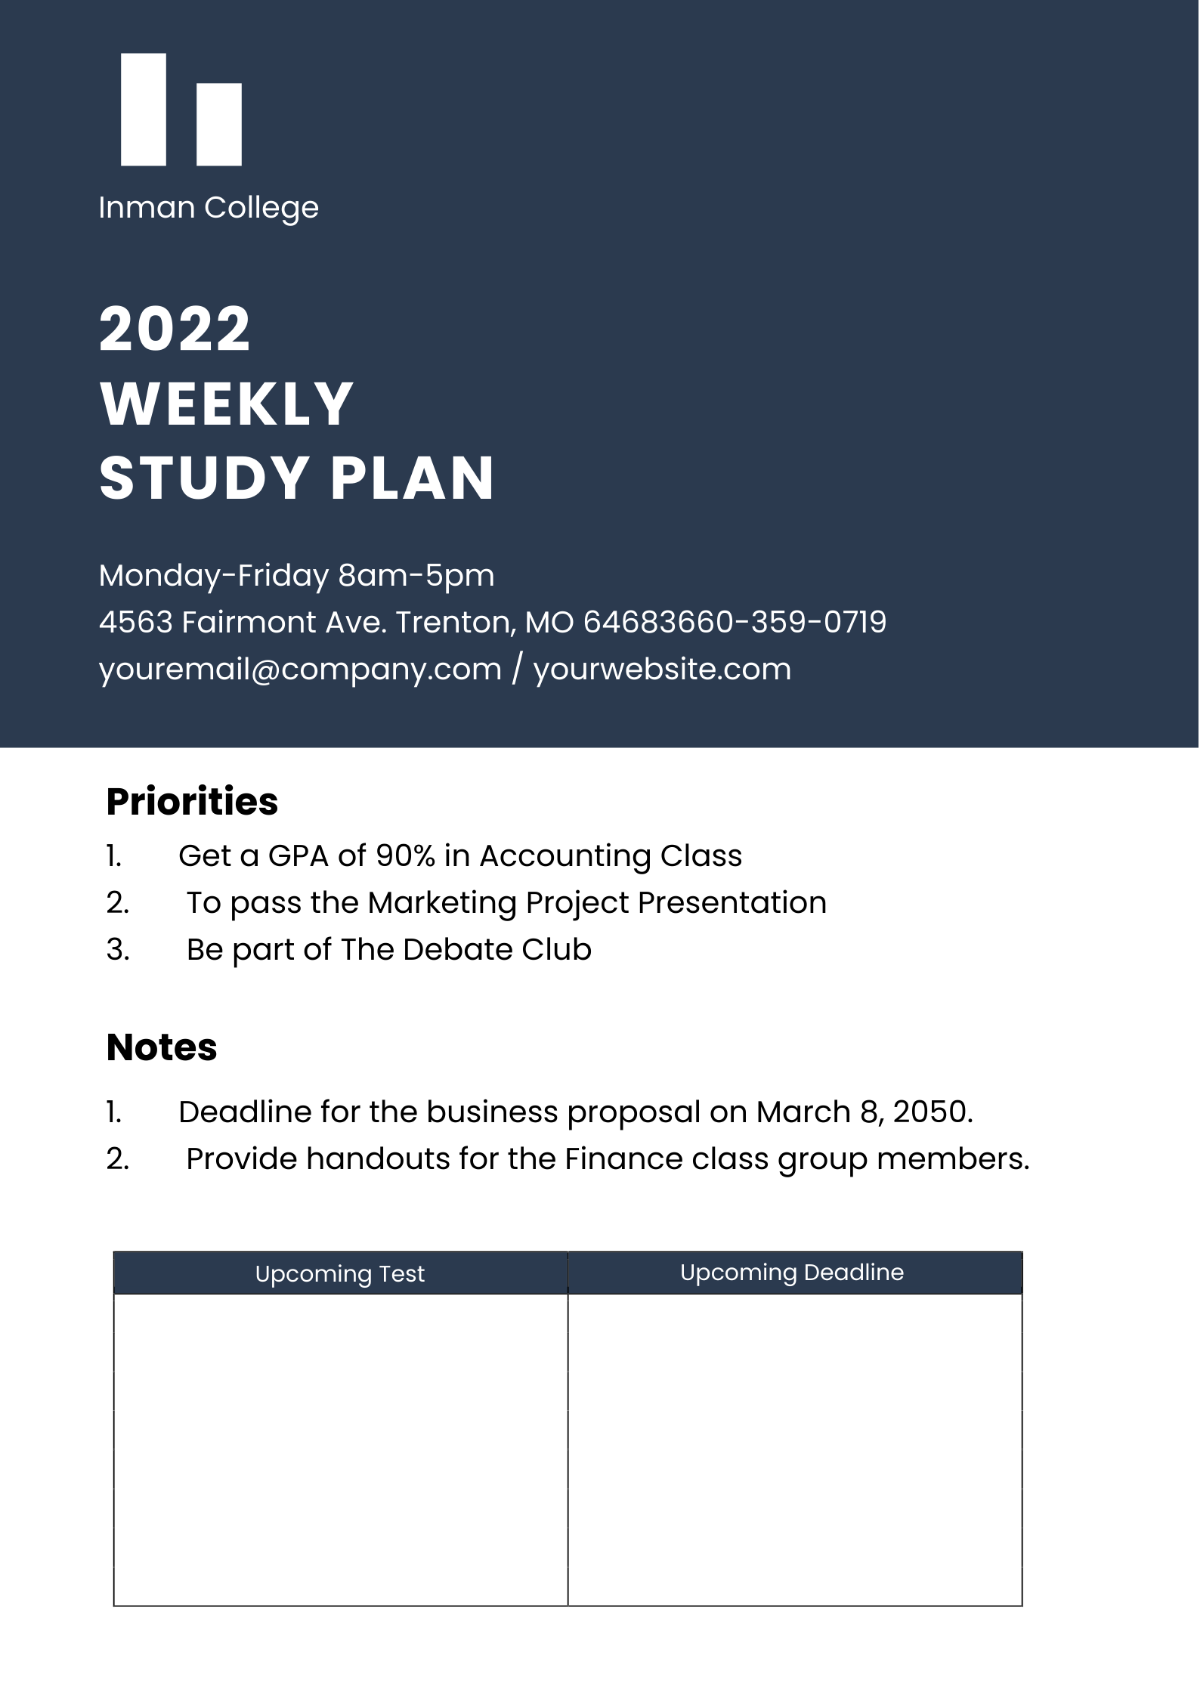 College Planner Template